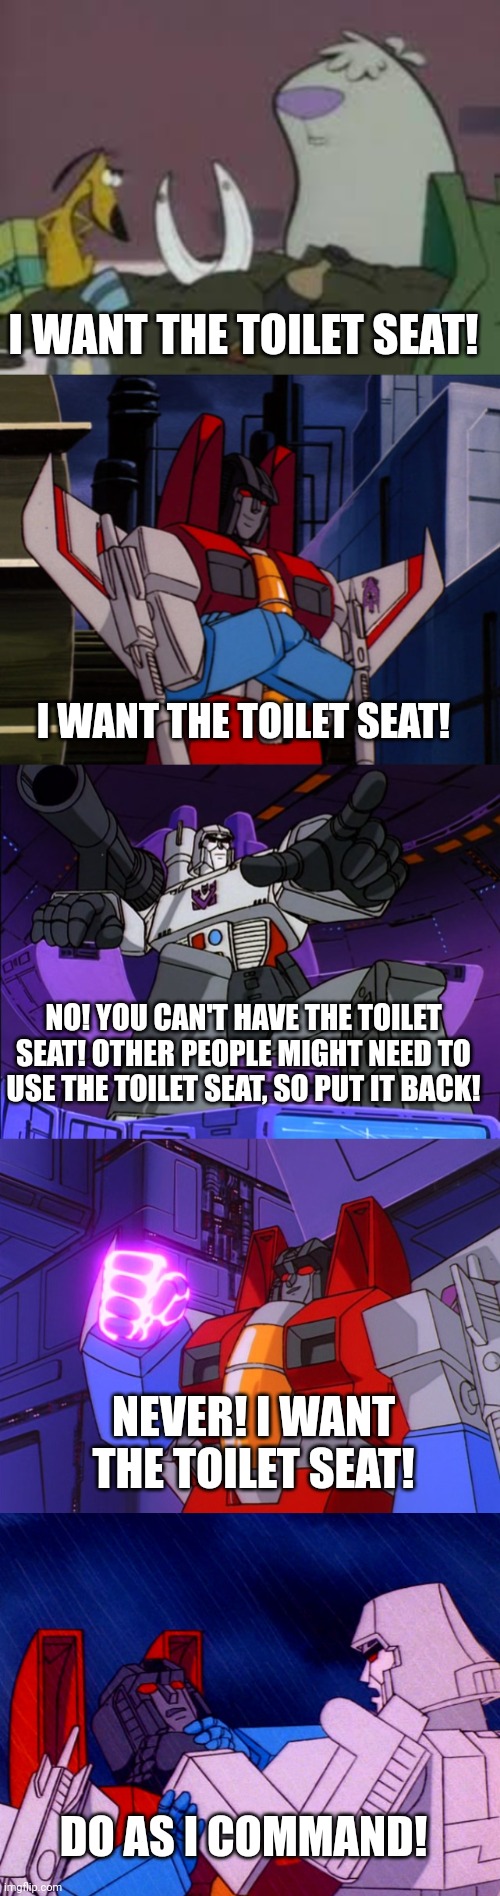  I WANT THE TOILET SEAT! I WANT THE TOILET SEAT! NO! YOU CAN'T HAVE THE TOILET SEAT! OTHER PEOPLE MIGHT NEED TO USE THE TOILET SEAT, SO PUT IT BACK! NEVER! I WANT THE TOILET SEAT! DO AS I COMMAND! | image tagged in 2 stupid dogs,megatron,starscream | made w/ Imgflip meme maker